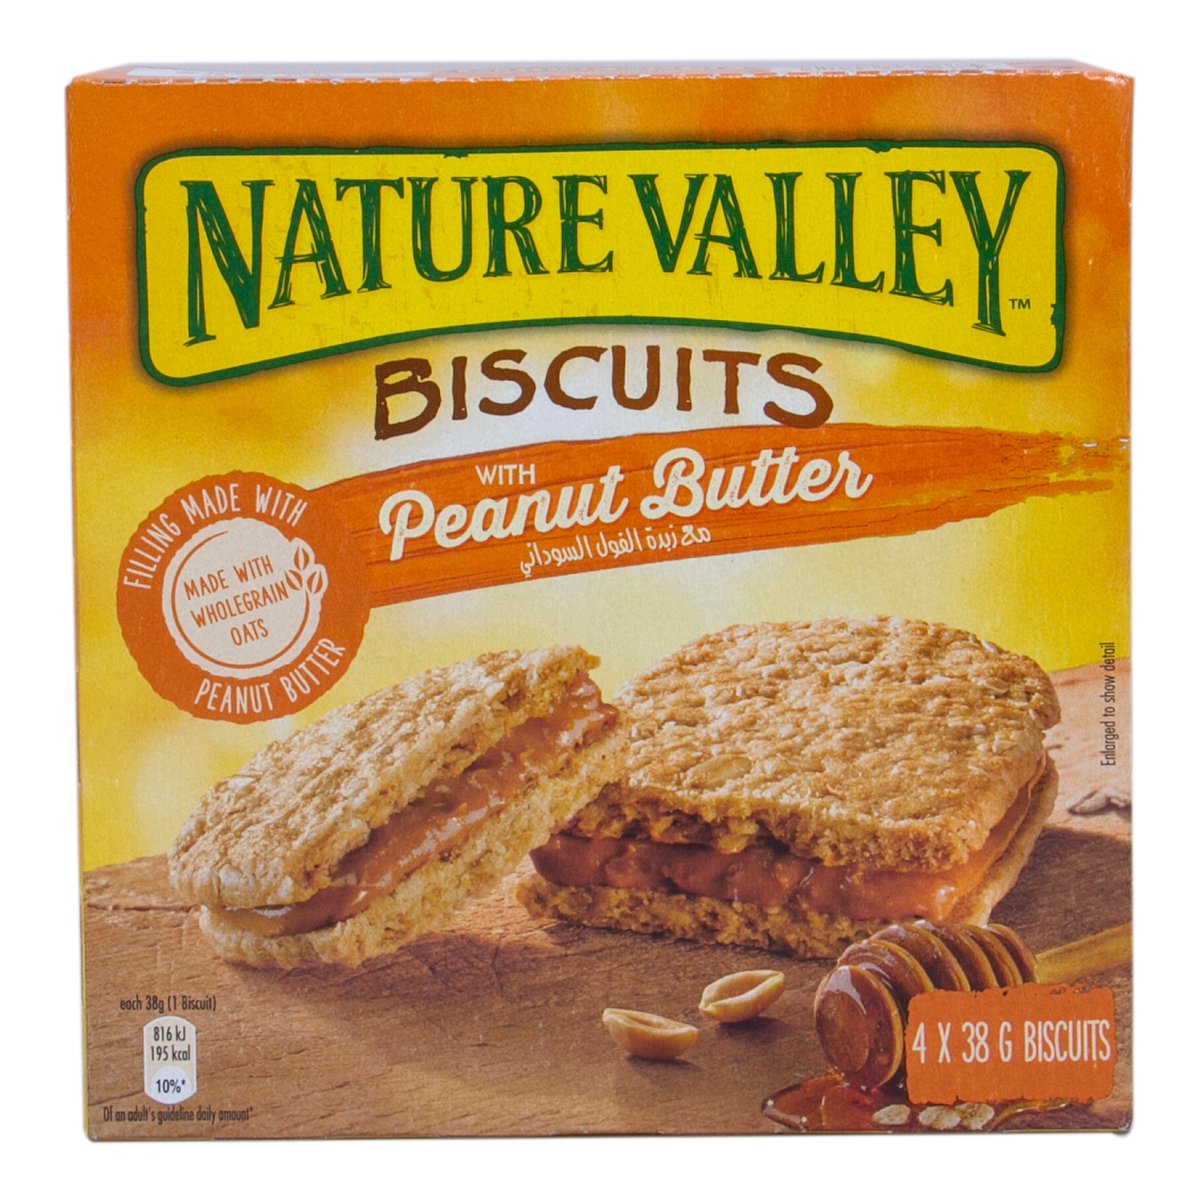 Nature Valley Biscuits With Peanut Butter 4 x 38 g